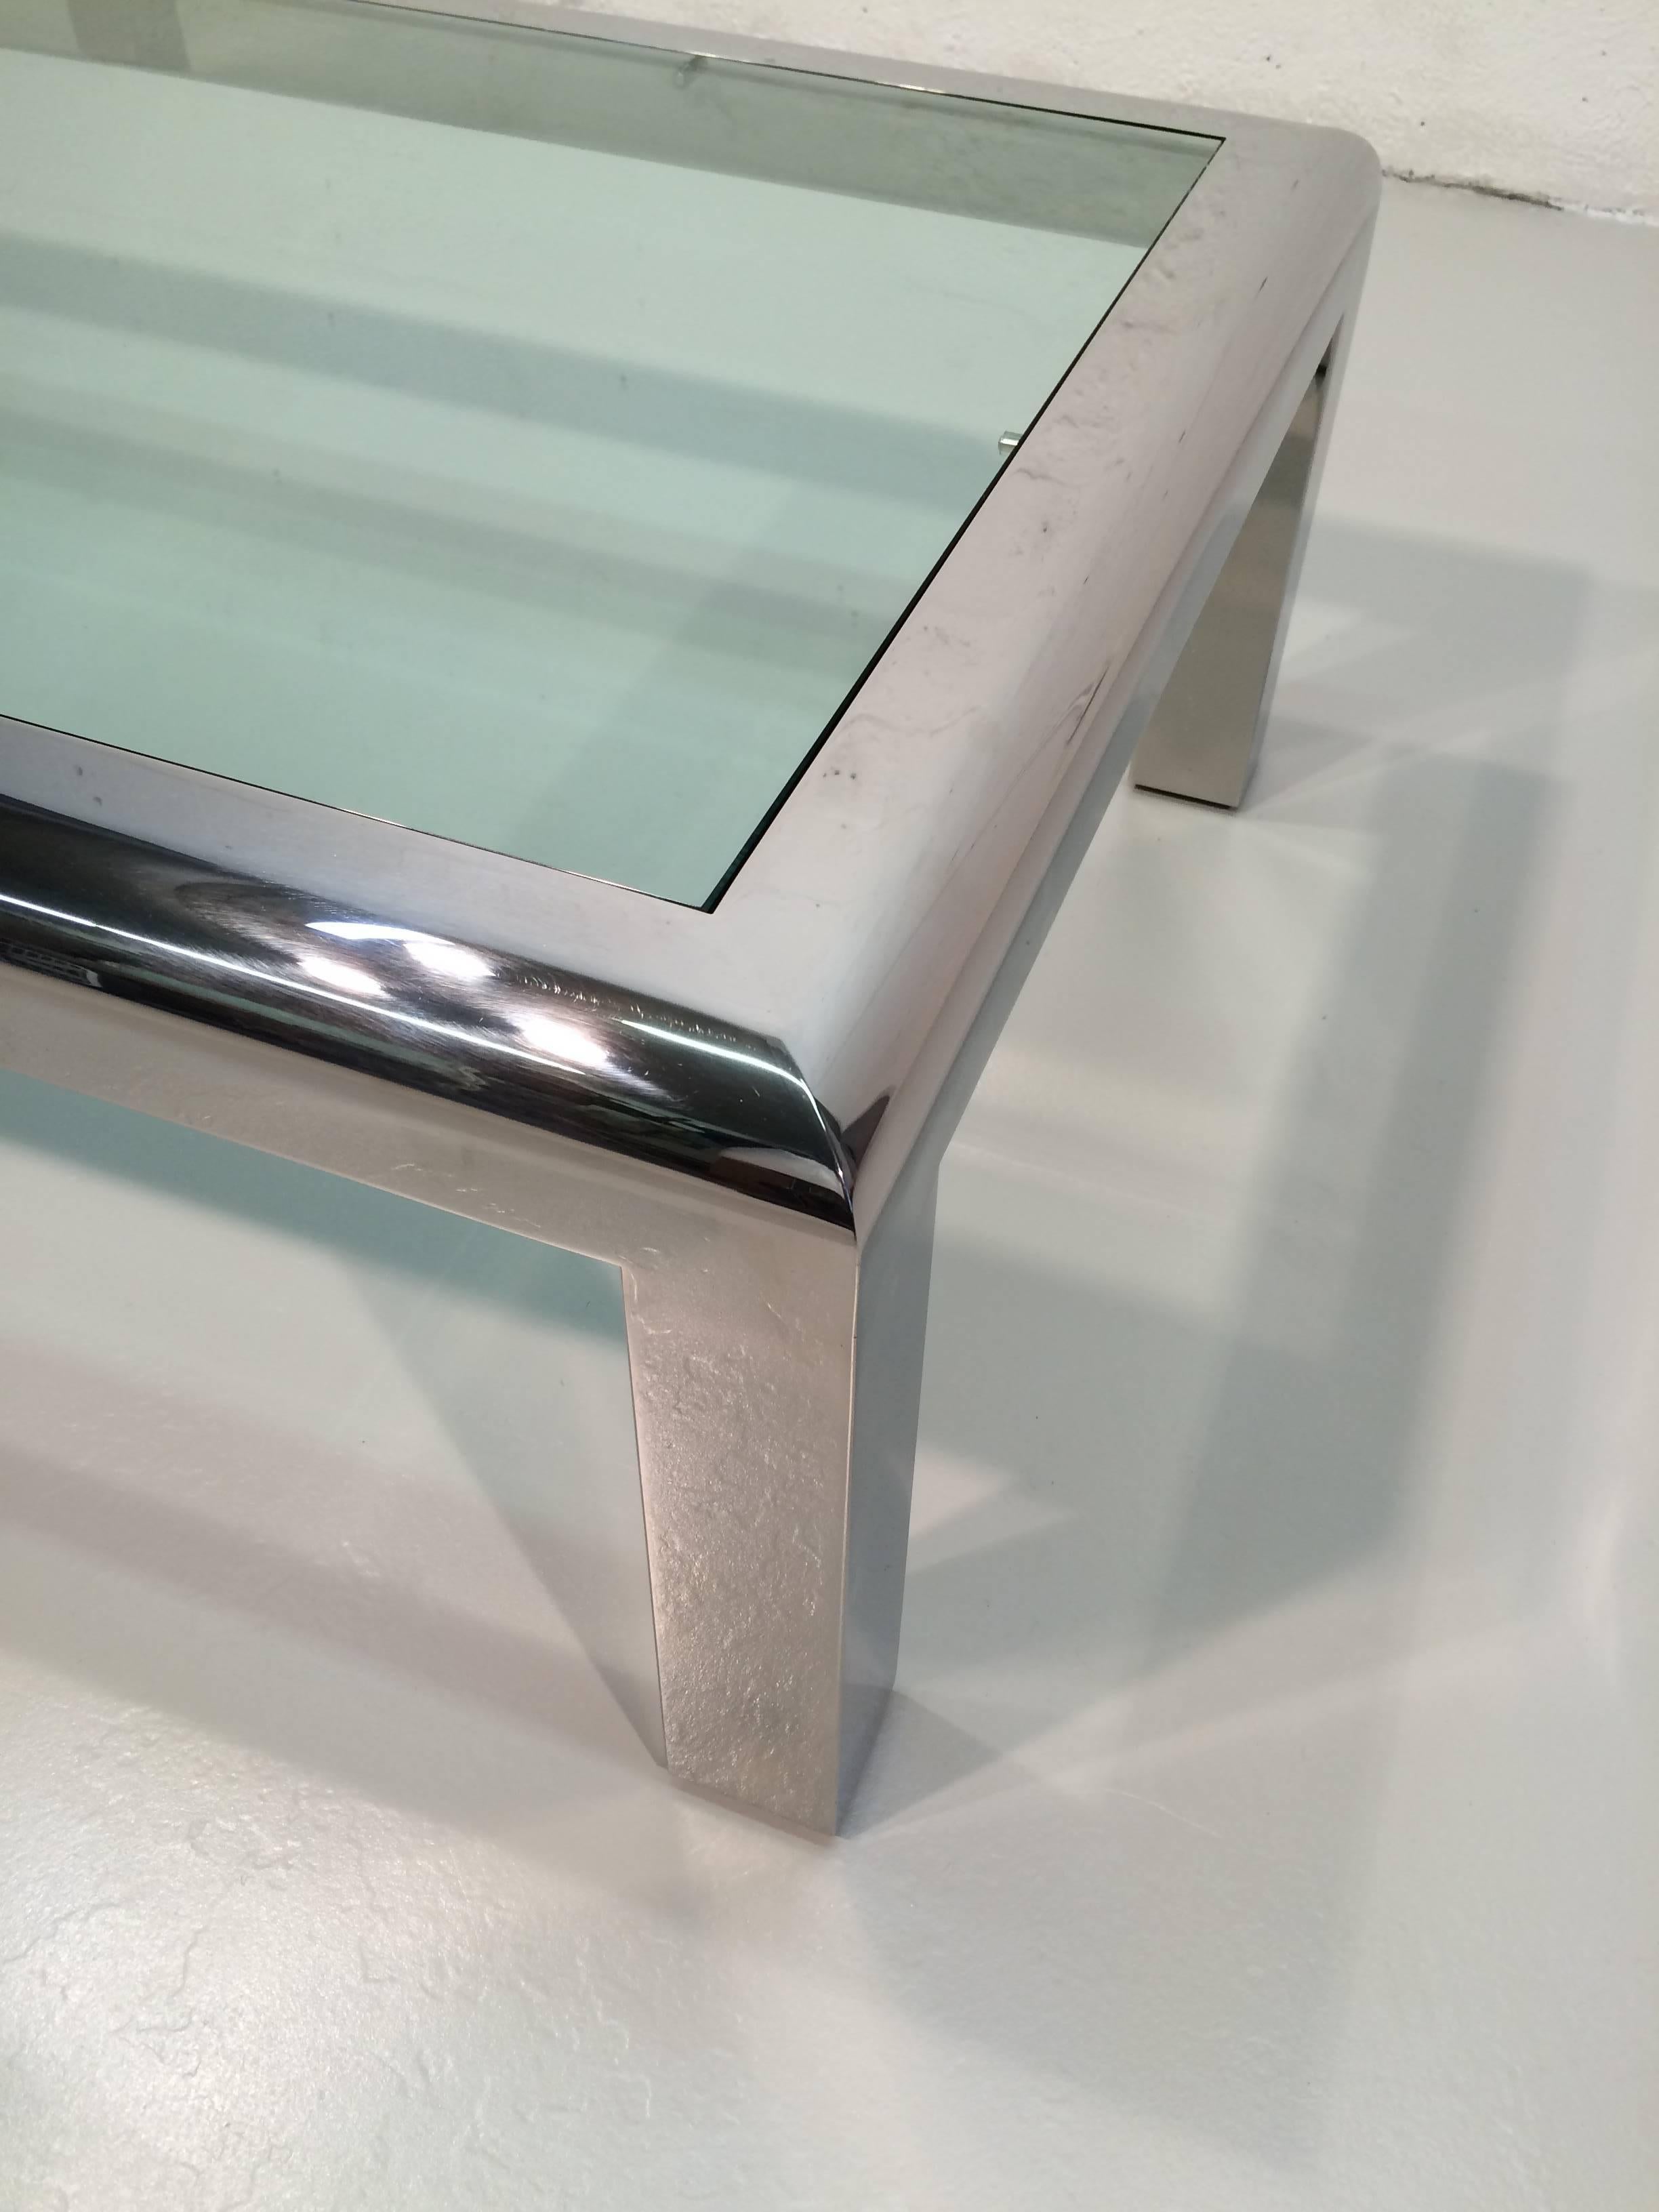 Very well-made stainless steel and glass coffee table.